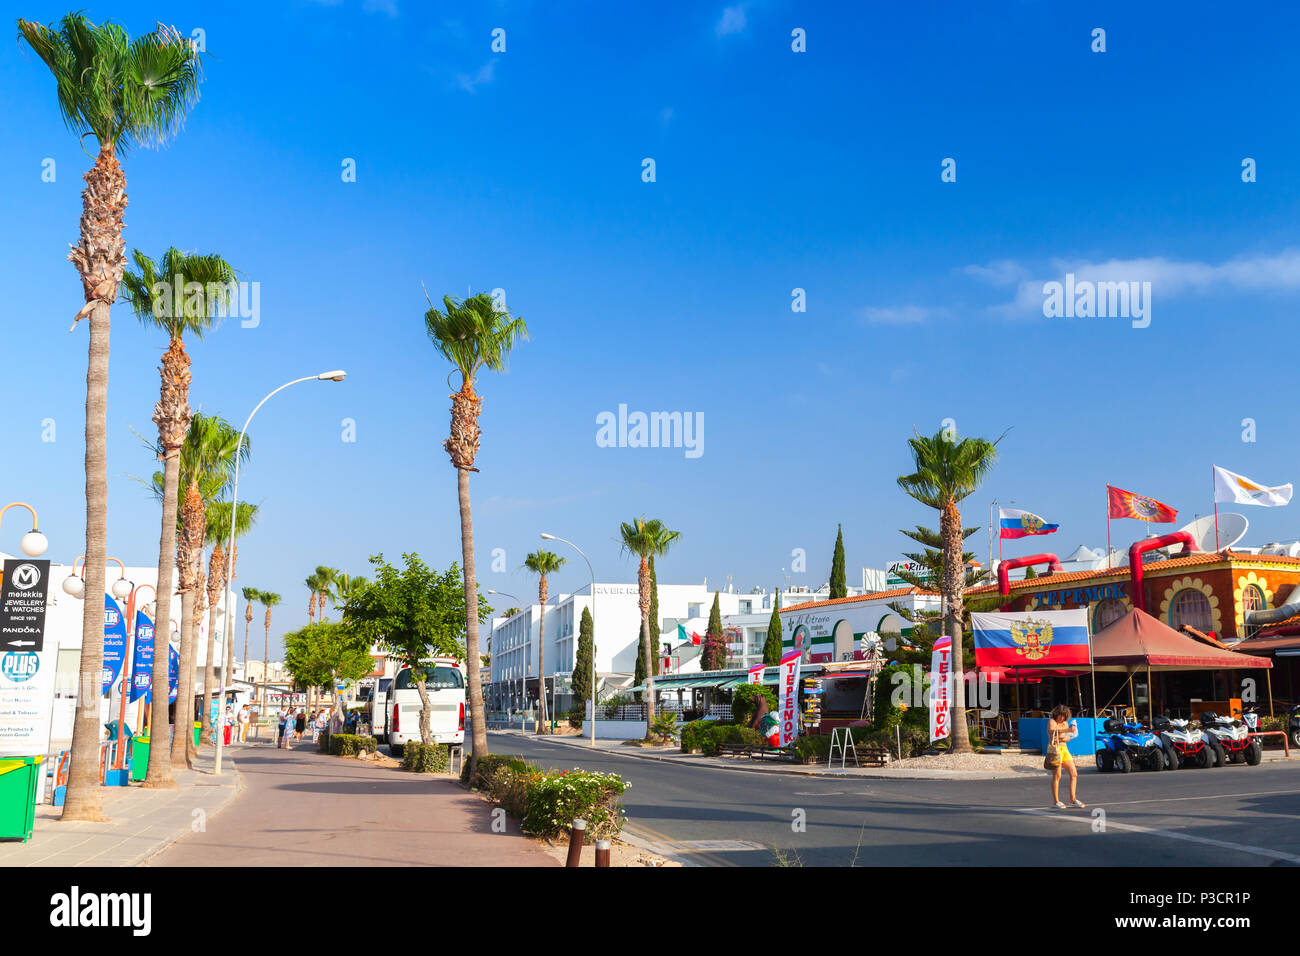 Ayia Napa, Cyprus - June 11, 2018: Agia Napa town on south coast of Cyprus island, street view at summer day. Tourists walk on street Stock Photo